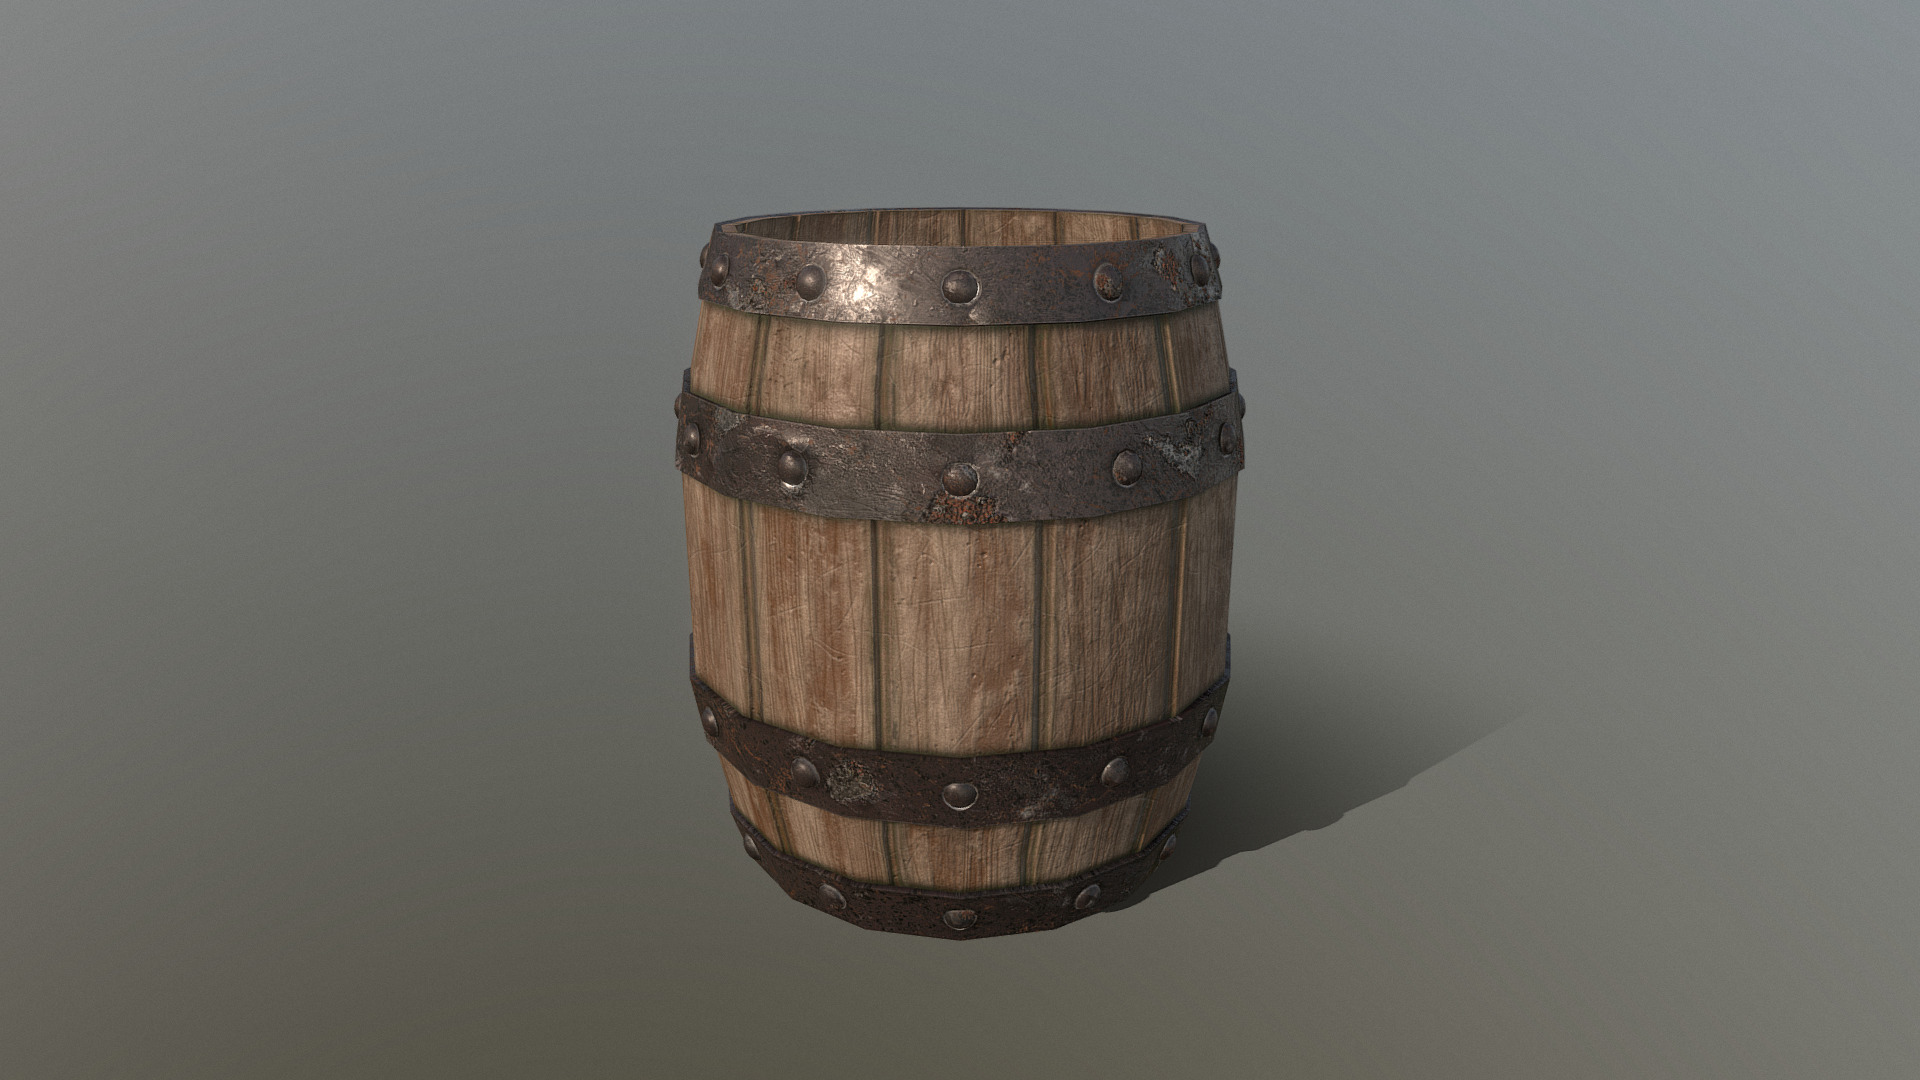 3D model HIE Wine Barrel D180323 - This is a 3D model of the HIE Wine Barrel D180323. The 3D model is about a wooden box with a metal lid.